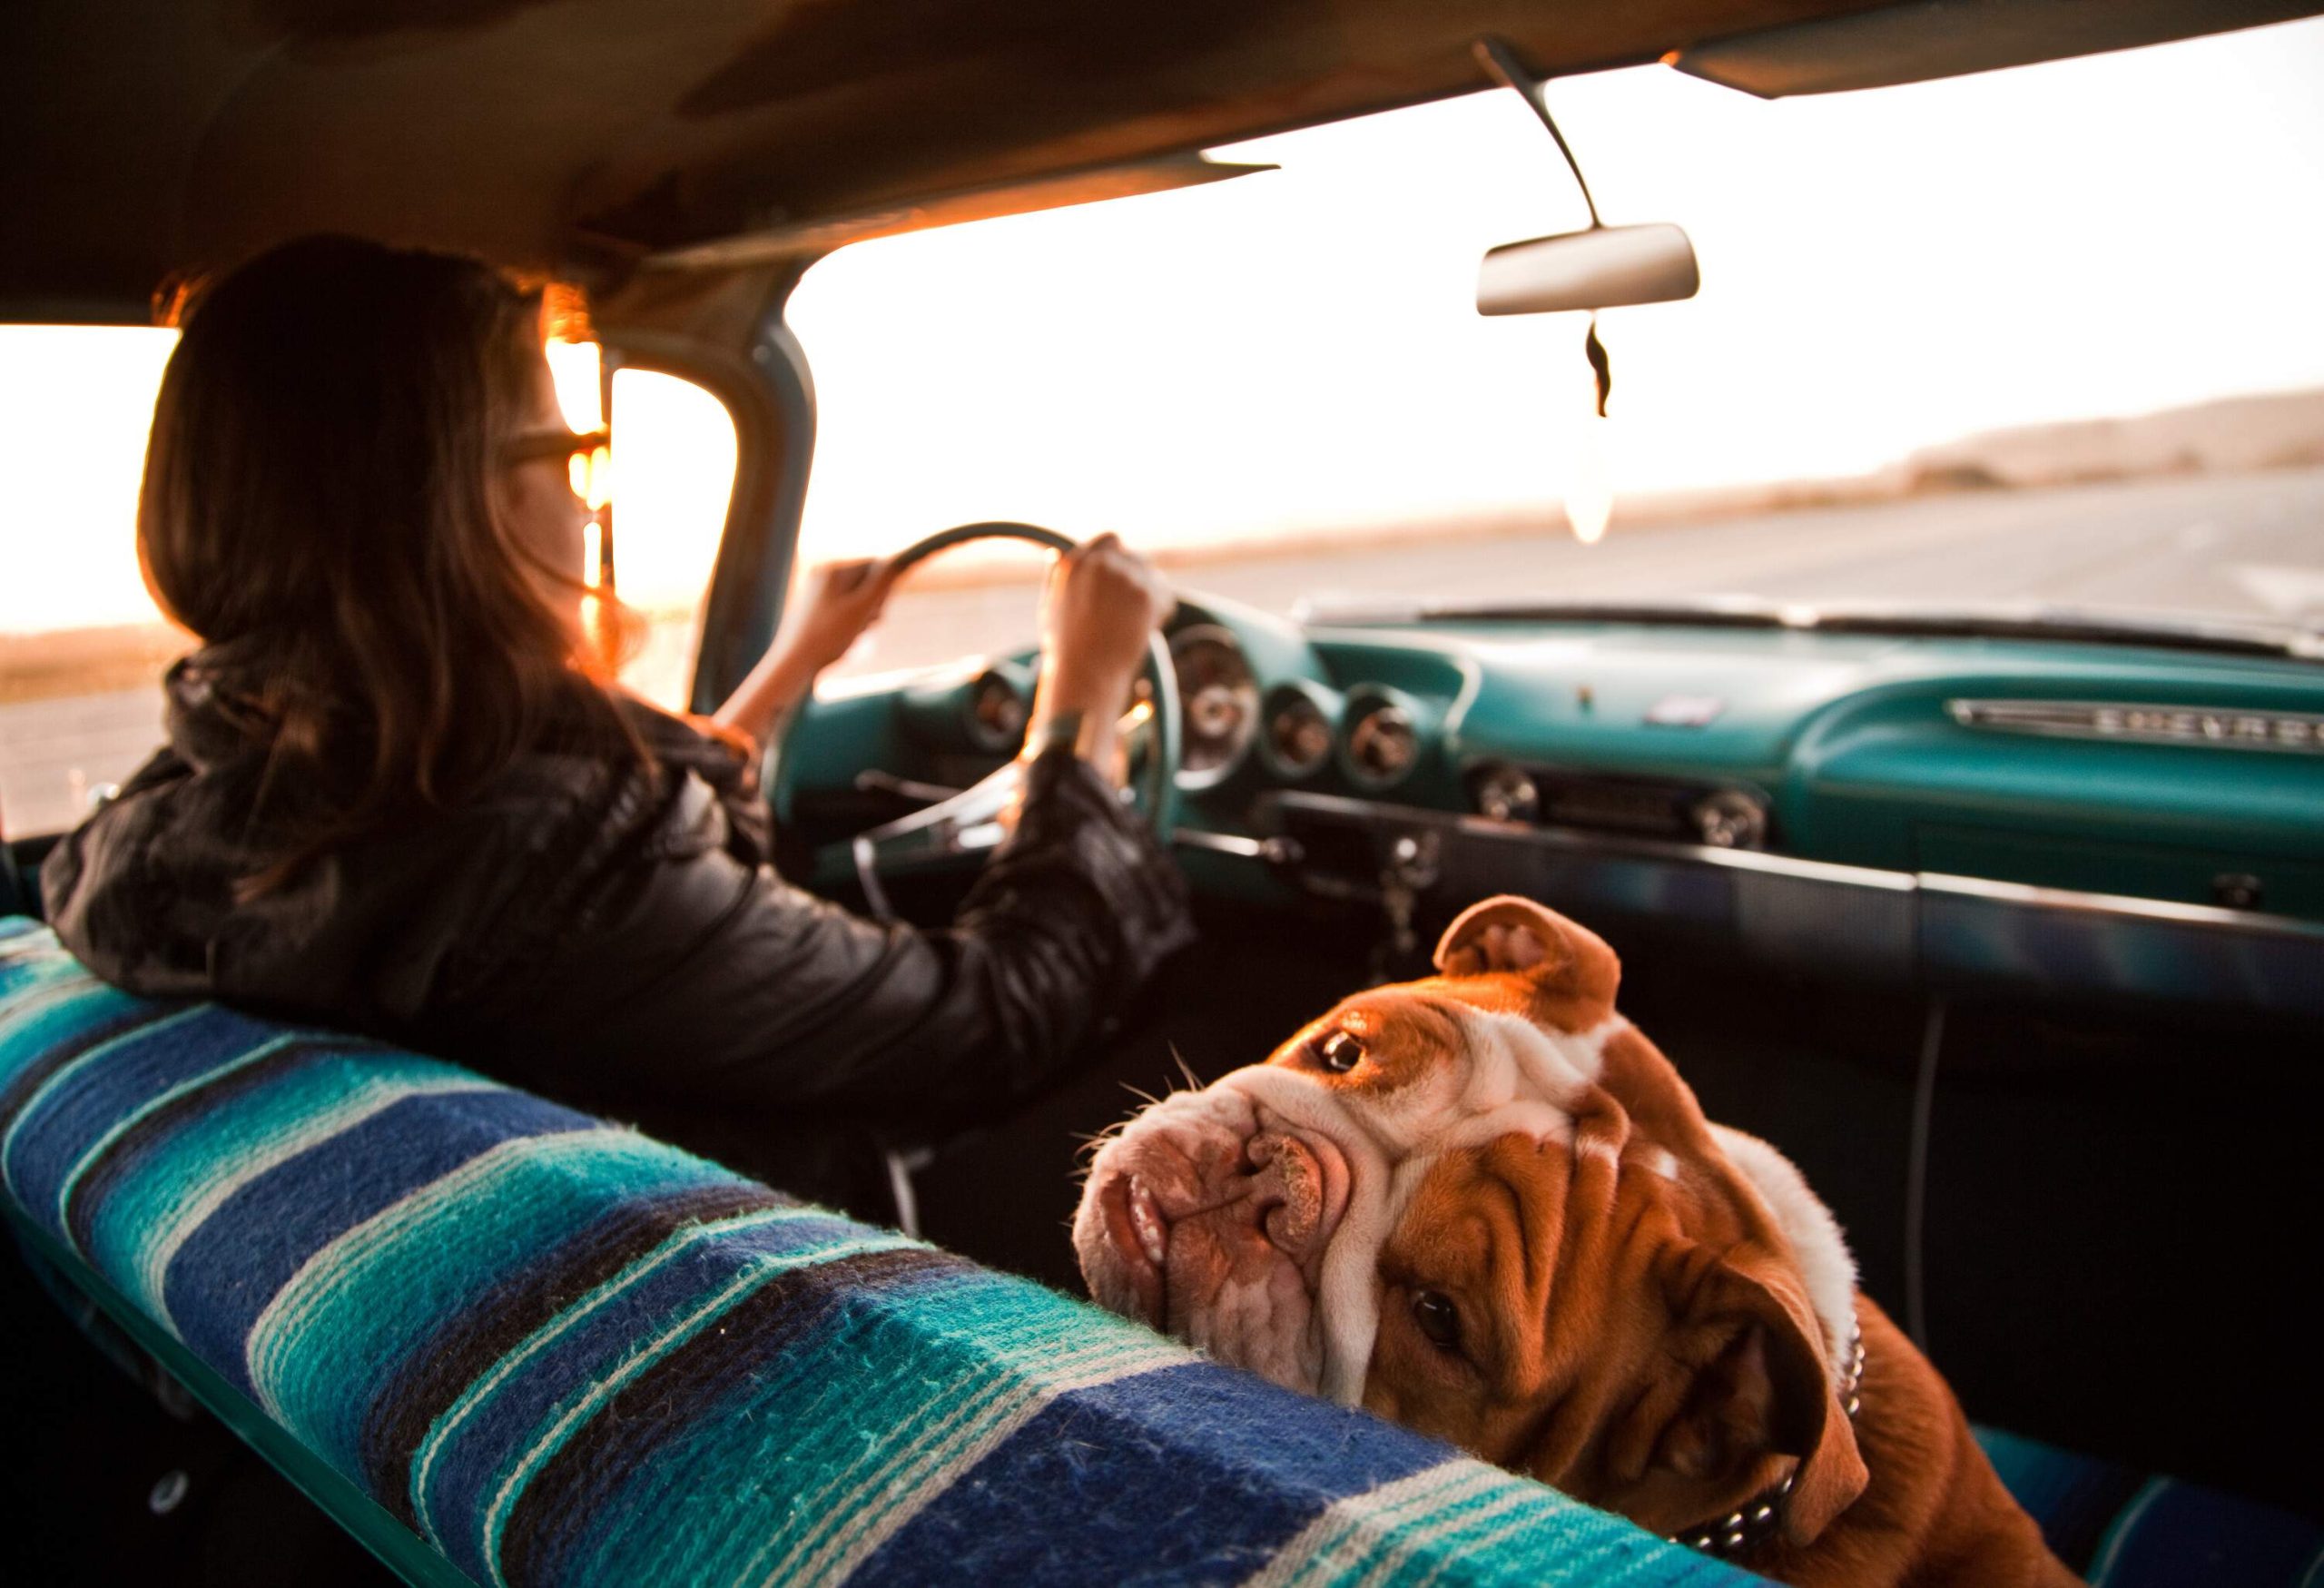 A brunette woman drives a car while a dog glances back from the passenger's seat.